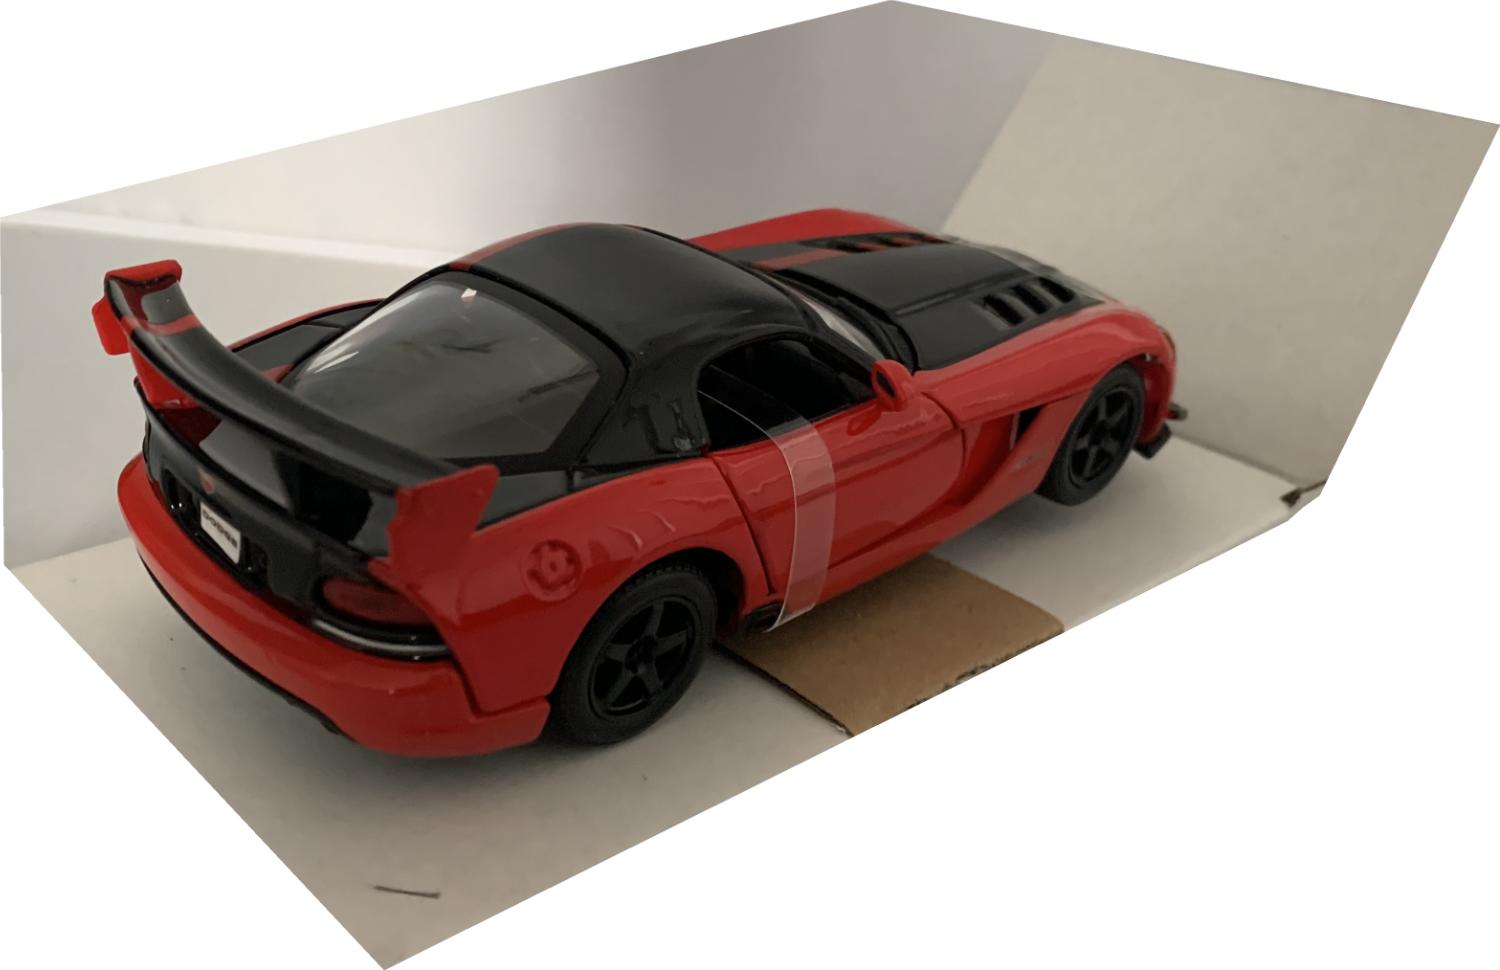 An excellent reproduction of the Dodge Viper SRT 10 ACR with high level of detail throughout, all authentically recreated.